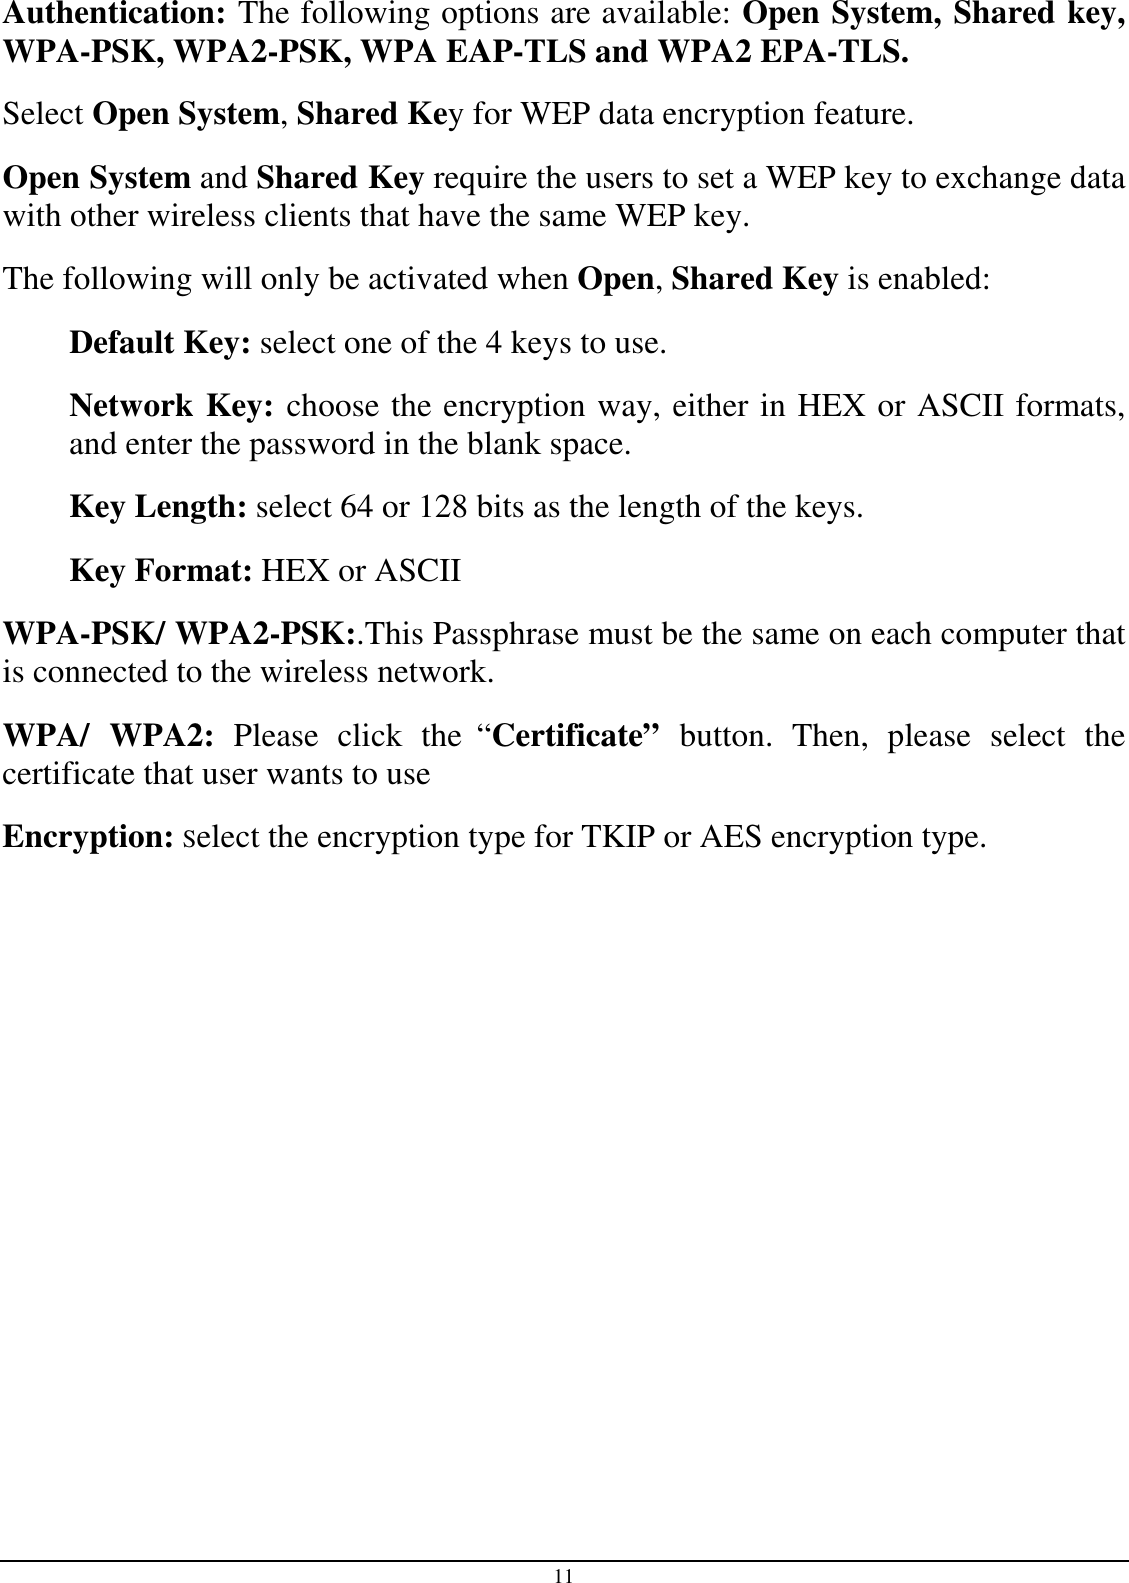 11 Authentication: The following options are available: Open System, Shared key, WPA-PSK, WPA2-PSK, WPA EAP-TLS and WPA2 EPA-TLS.  Select Open System, Shared Key for WEP data encryption feature. Open System and Shared Key require the users to set a WEP key to exchange data with other wireless clients that have the same WEP key. The following will only be activated when Open, Shared Key is enabled: Default Key: select one of the 4 keys to use. Network Key: choose the encryption way, either in HEX or ASCII formats, and enter the password in the blank space. Key Length: select 64 or 128 bits as the length of the keys. Key Format: HEX or ASCII  WPA-PSK/ WPA2-PSK:.This Passphrase must be the same on each computer that is connected to the wireless network. WPA/  WPA2:  Please  click  the “Certificate”  button.  Then,  please  select  the certificate that user wants to use Encryption: Select the encryption type for TKIP or AES encryption type.              